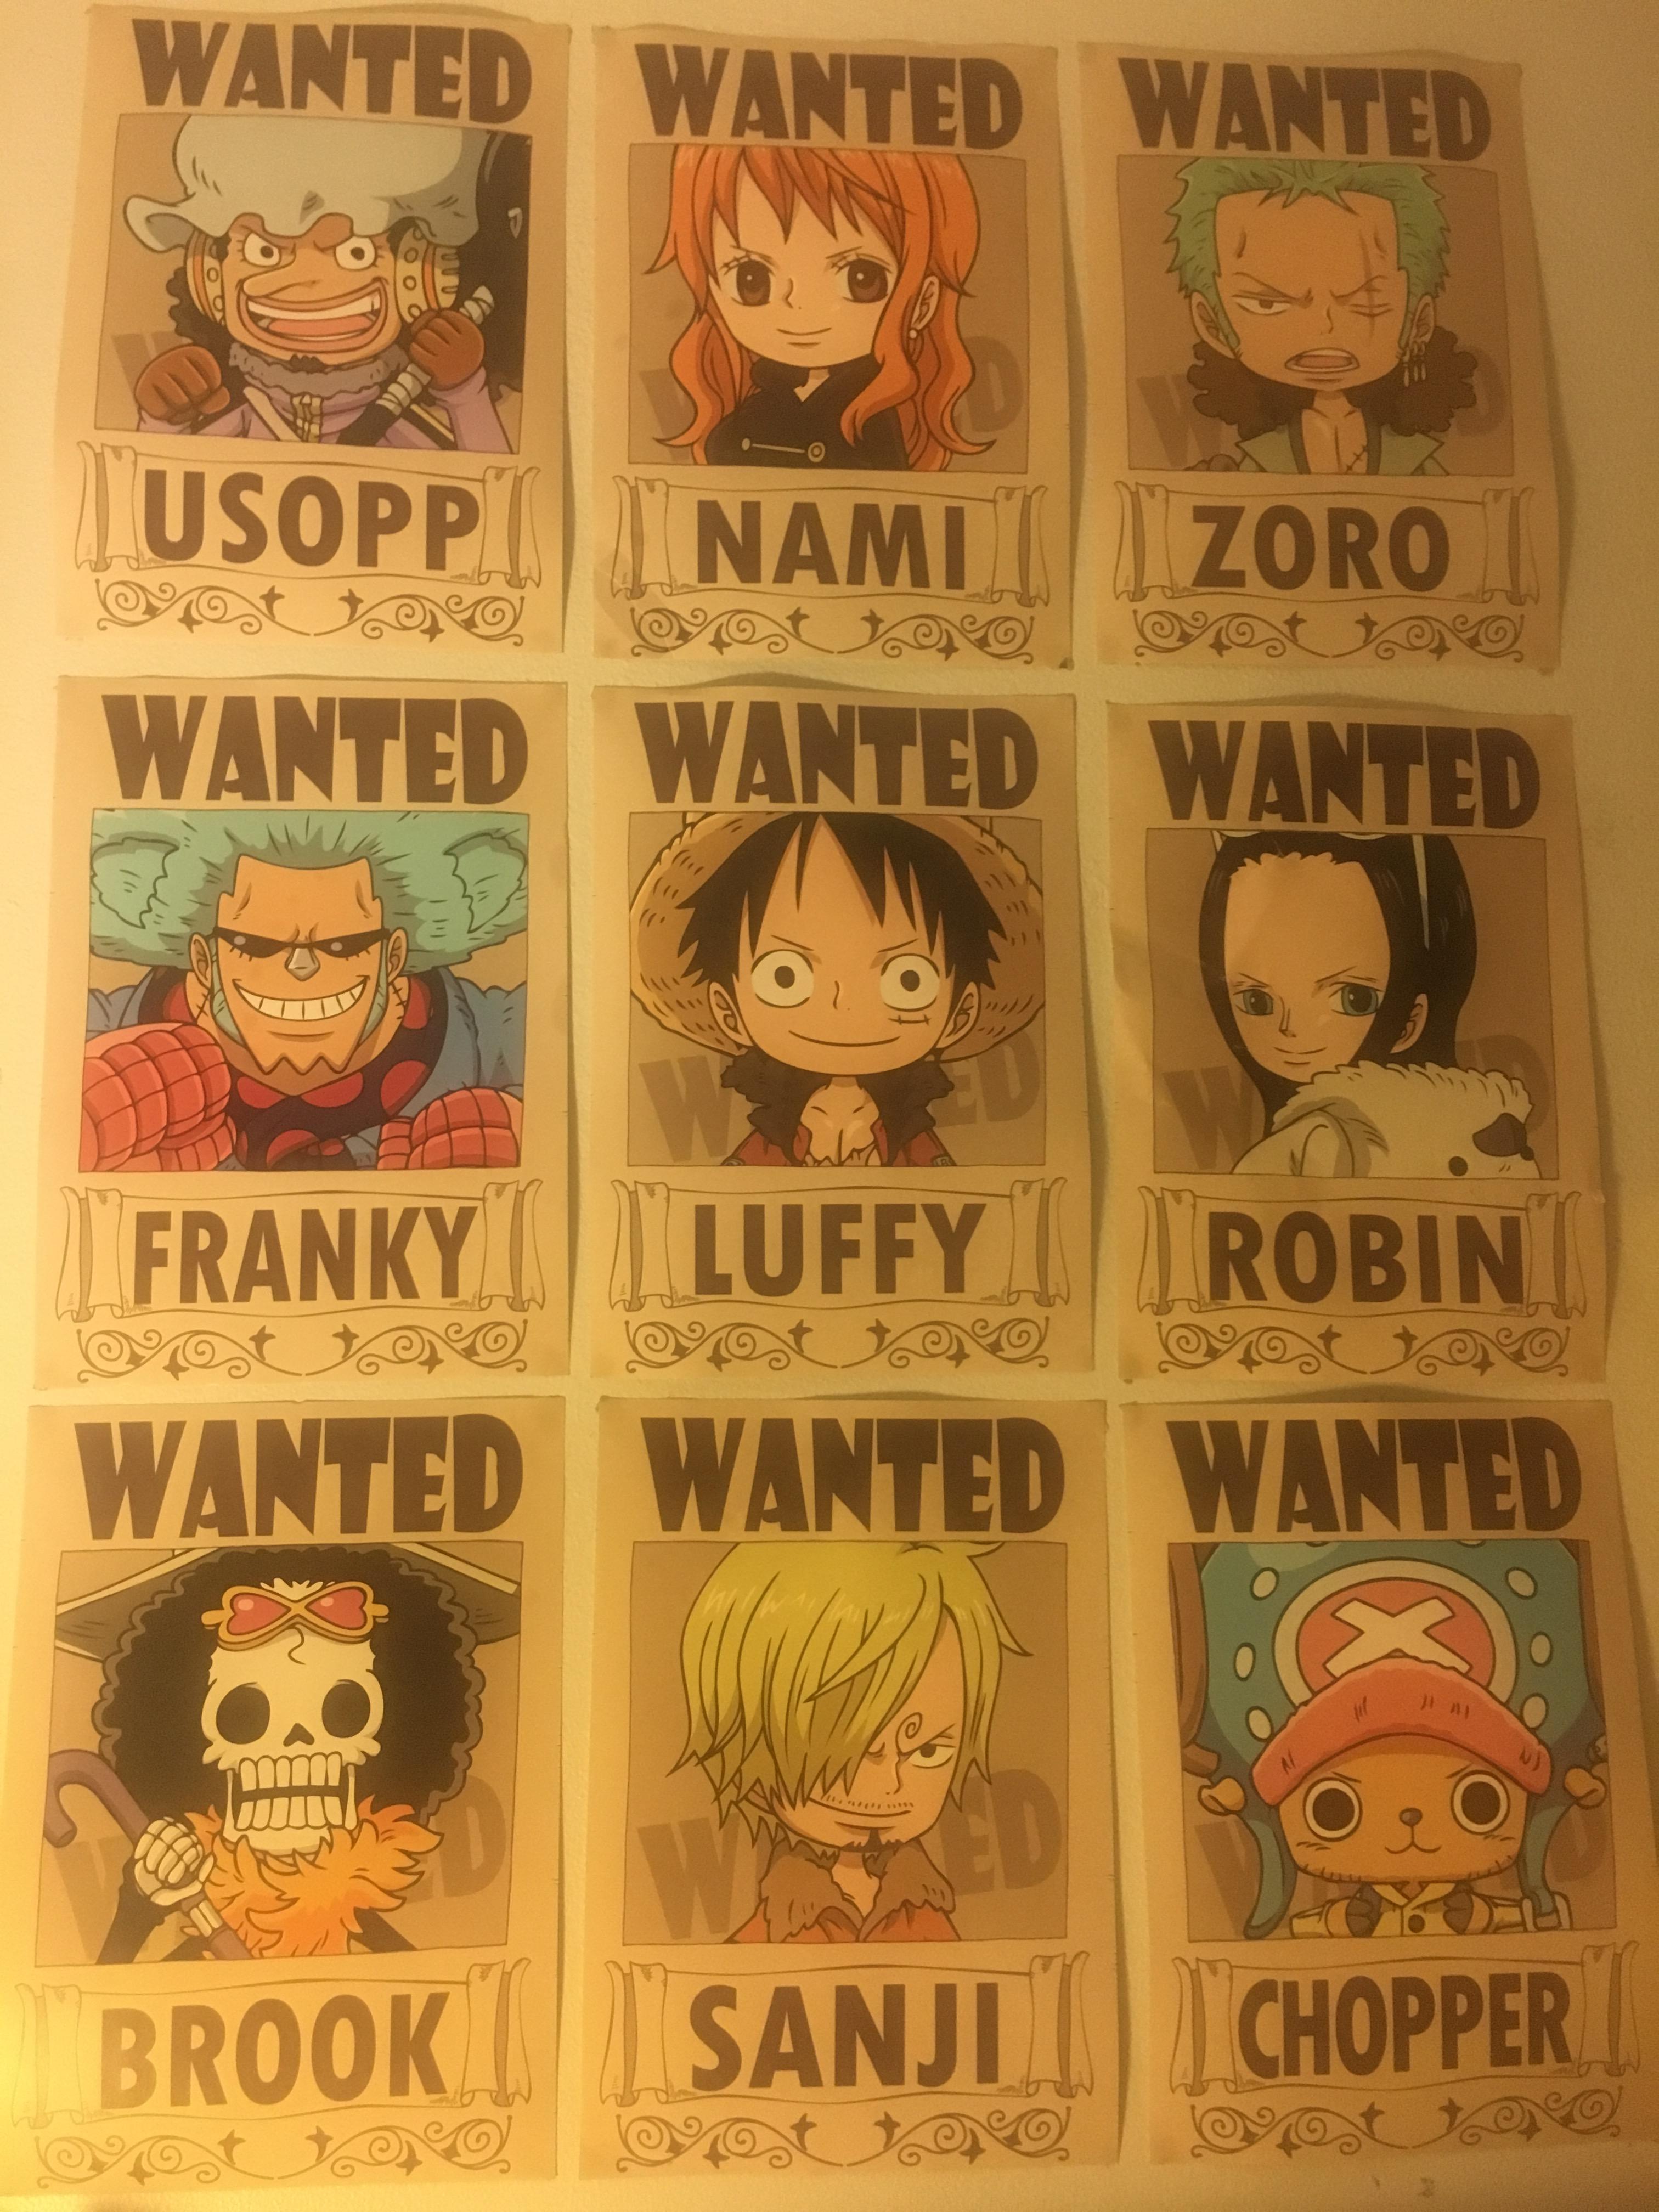 Brook Wanted Poster One Pieceonepiece Wall.blogspot.com